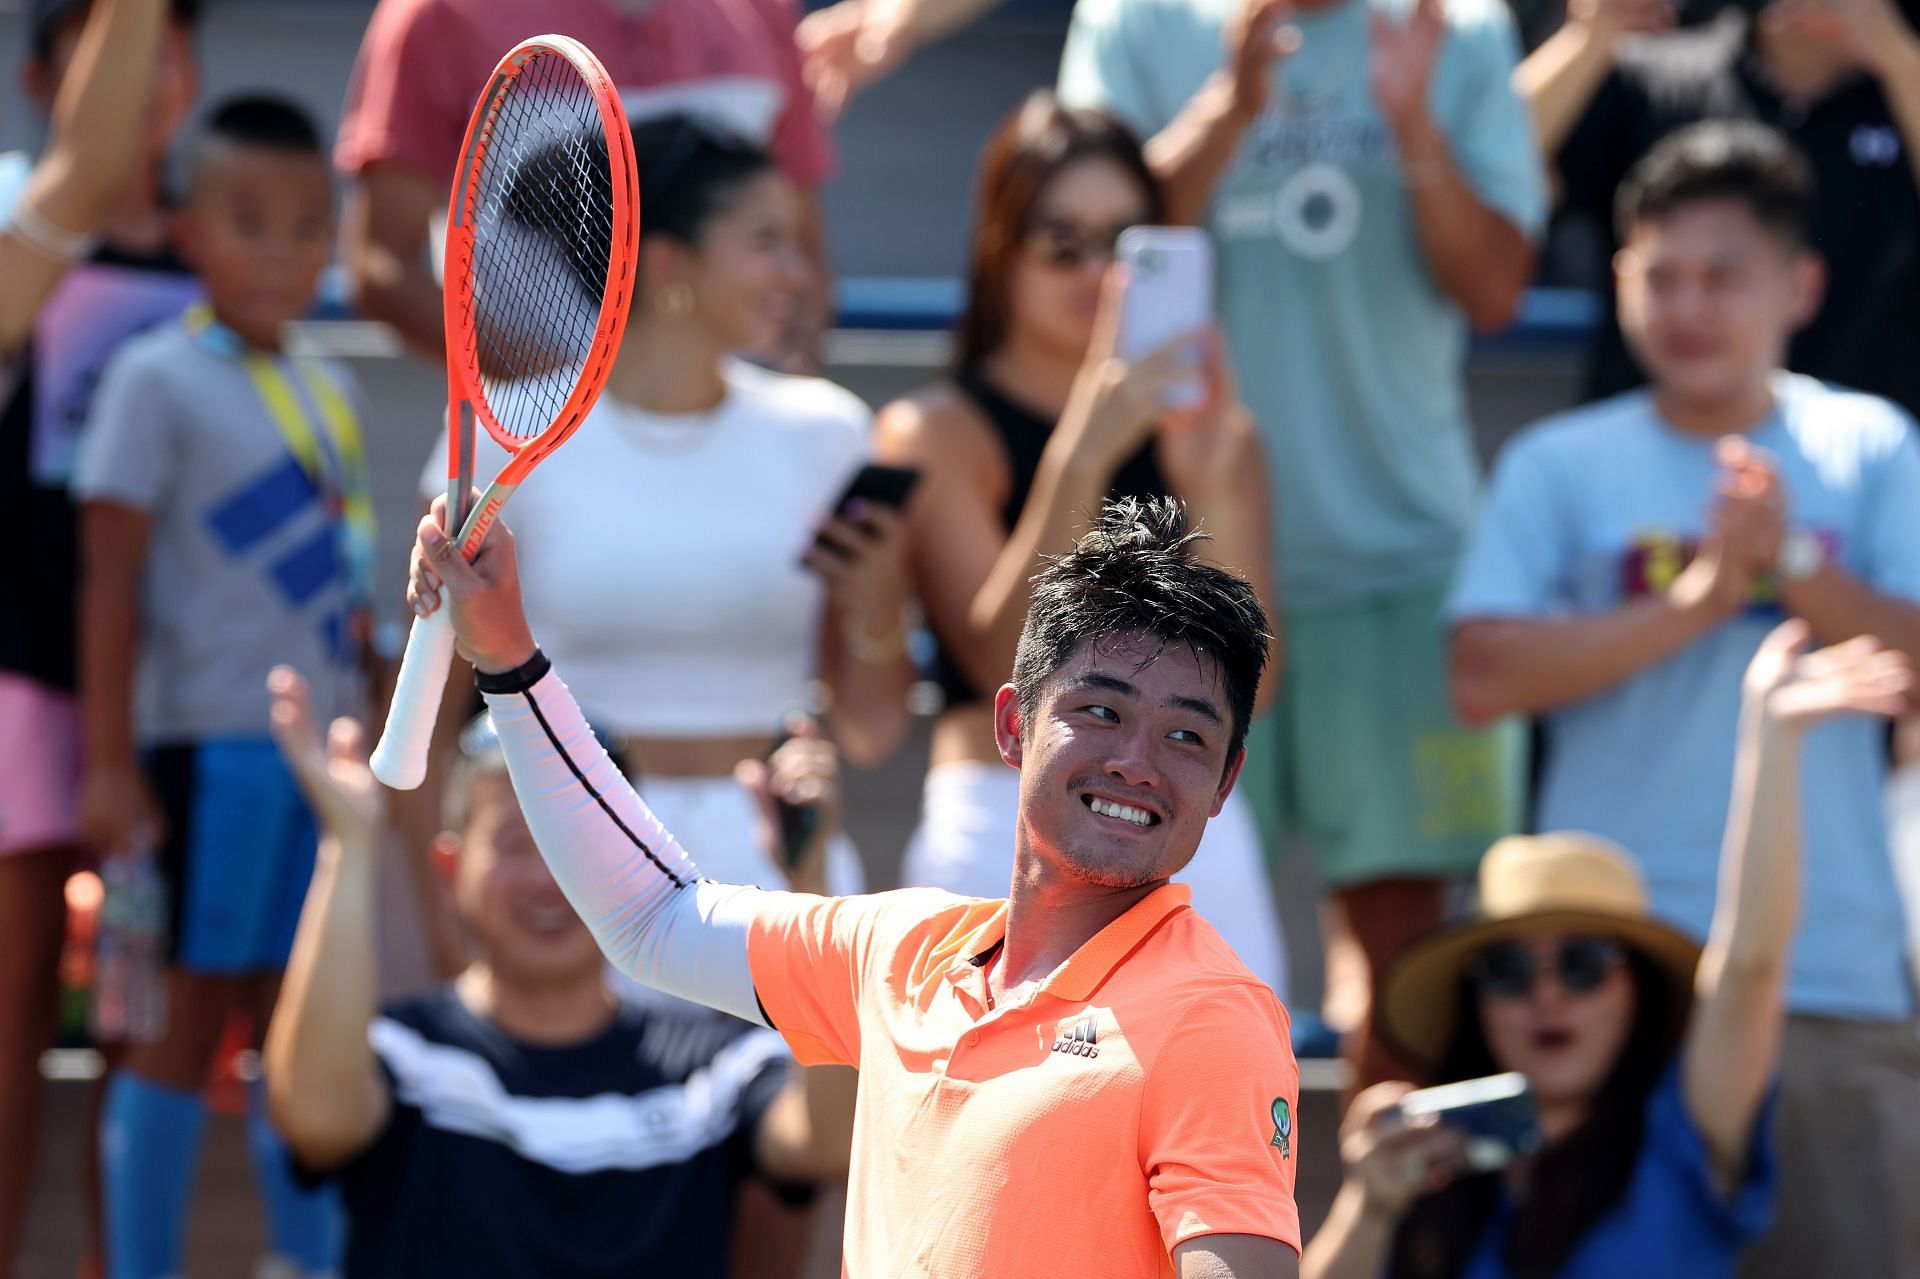 Wu Yibing is the first Chinese man to reach the third round of the US Open